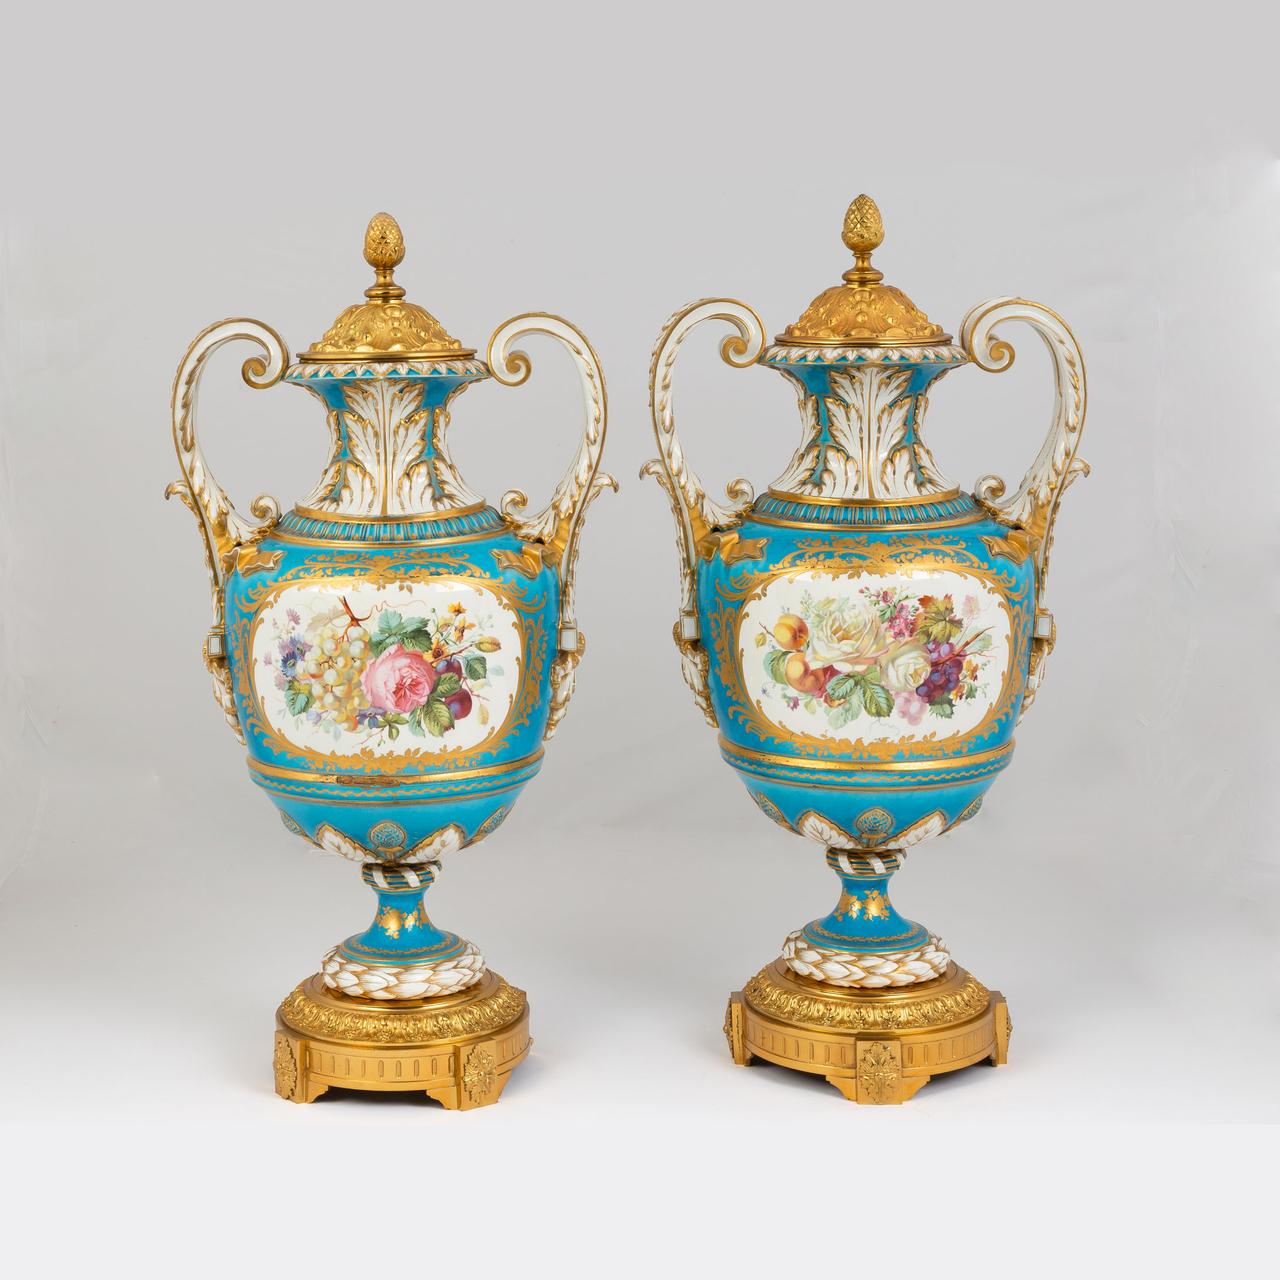 Beautifully hand painted with lovers to the front and a bouquet to the reverse with handles 

Date: 19th century
Origin: French
Dimension: 28 x 15 inches.